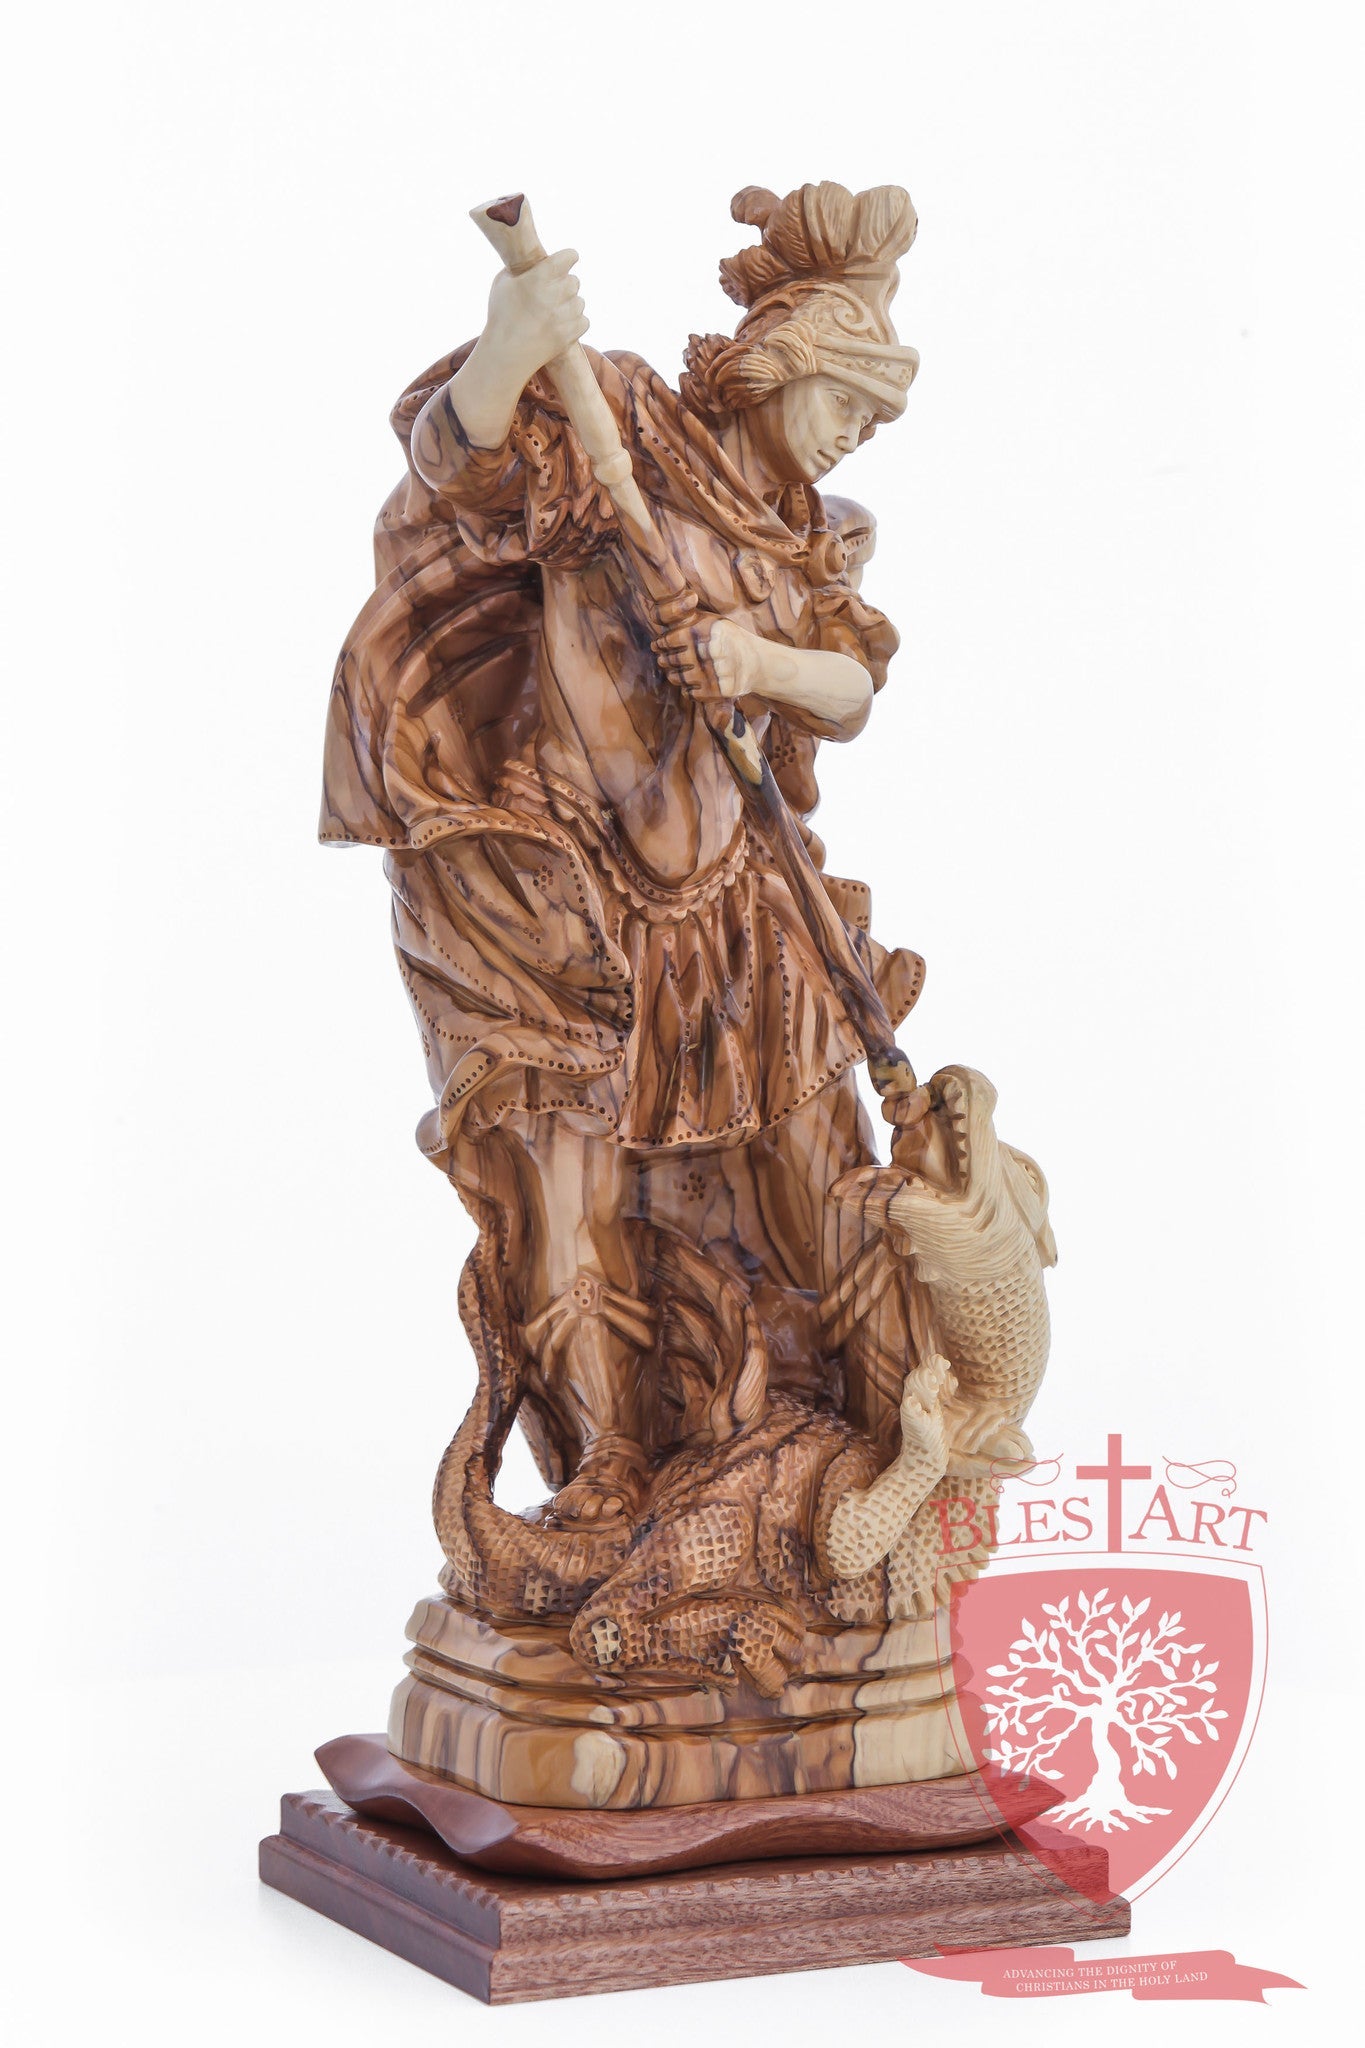 St. Michael the Archangel, Size: 13.8"/35 cm Height